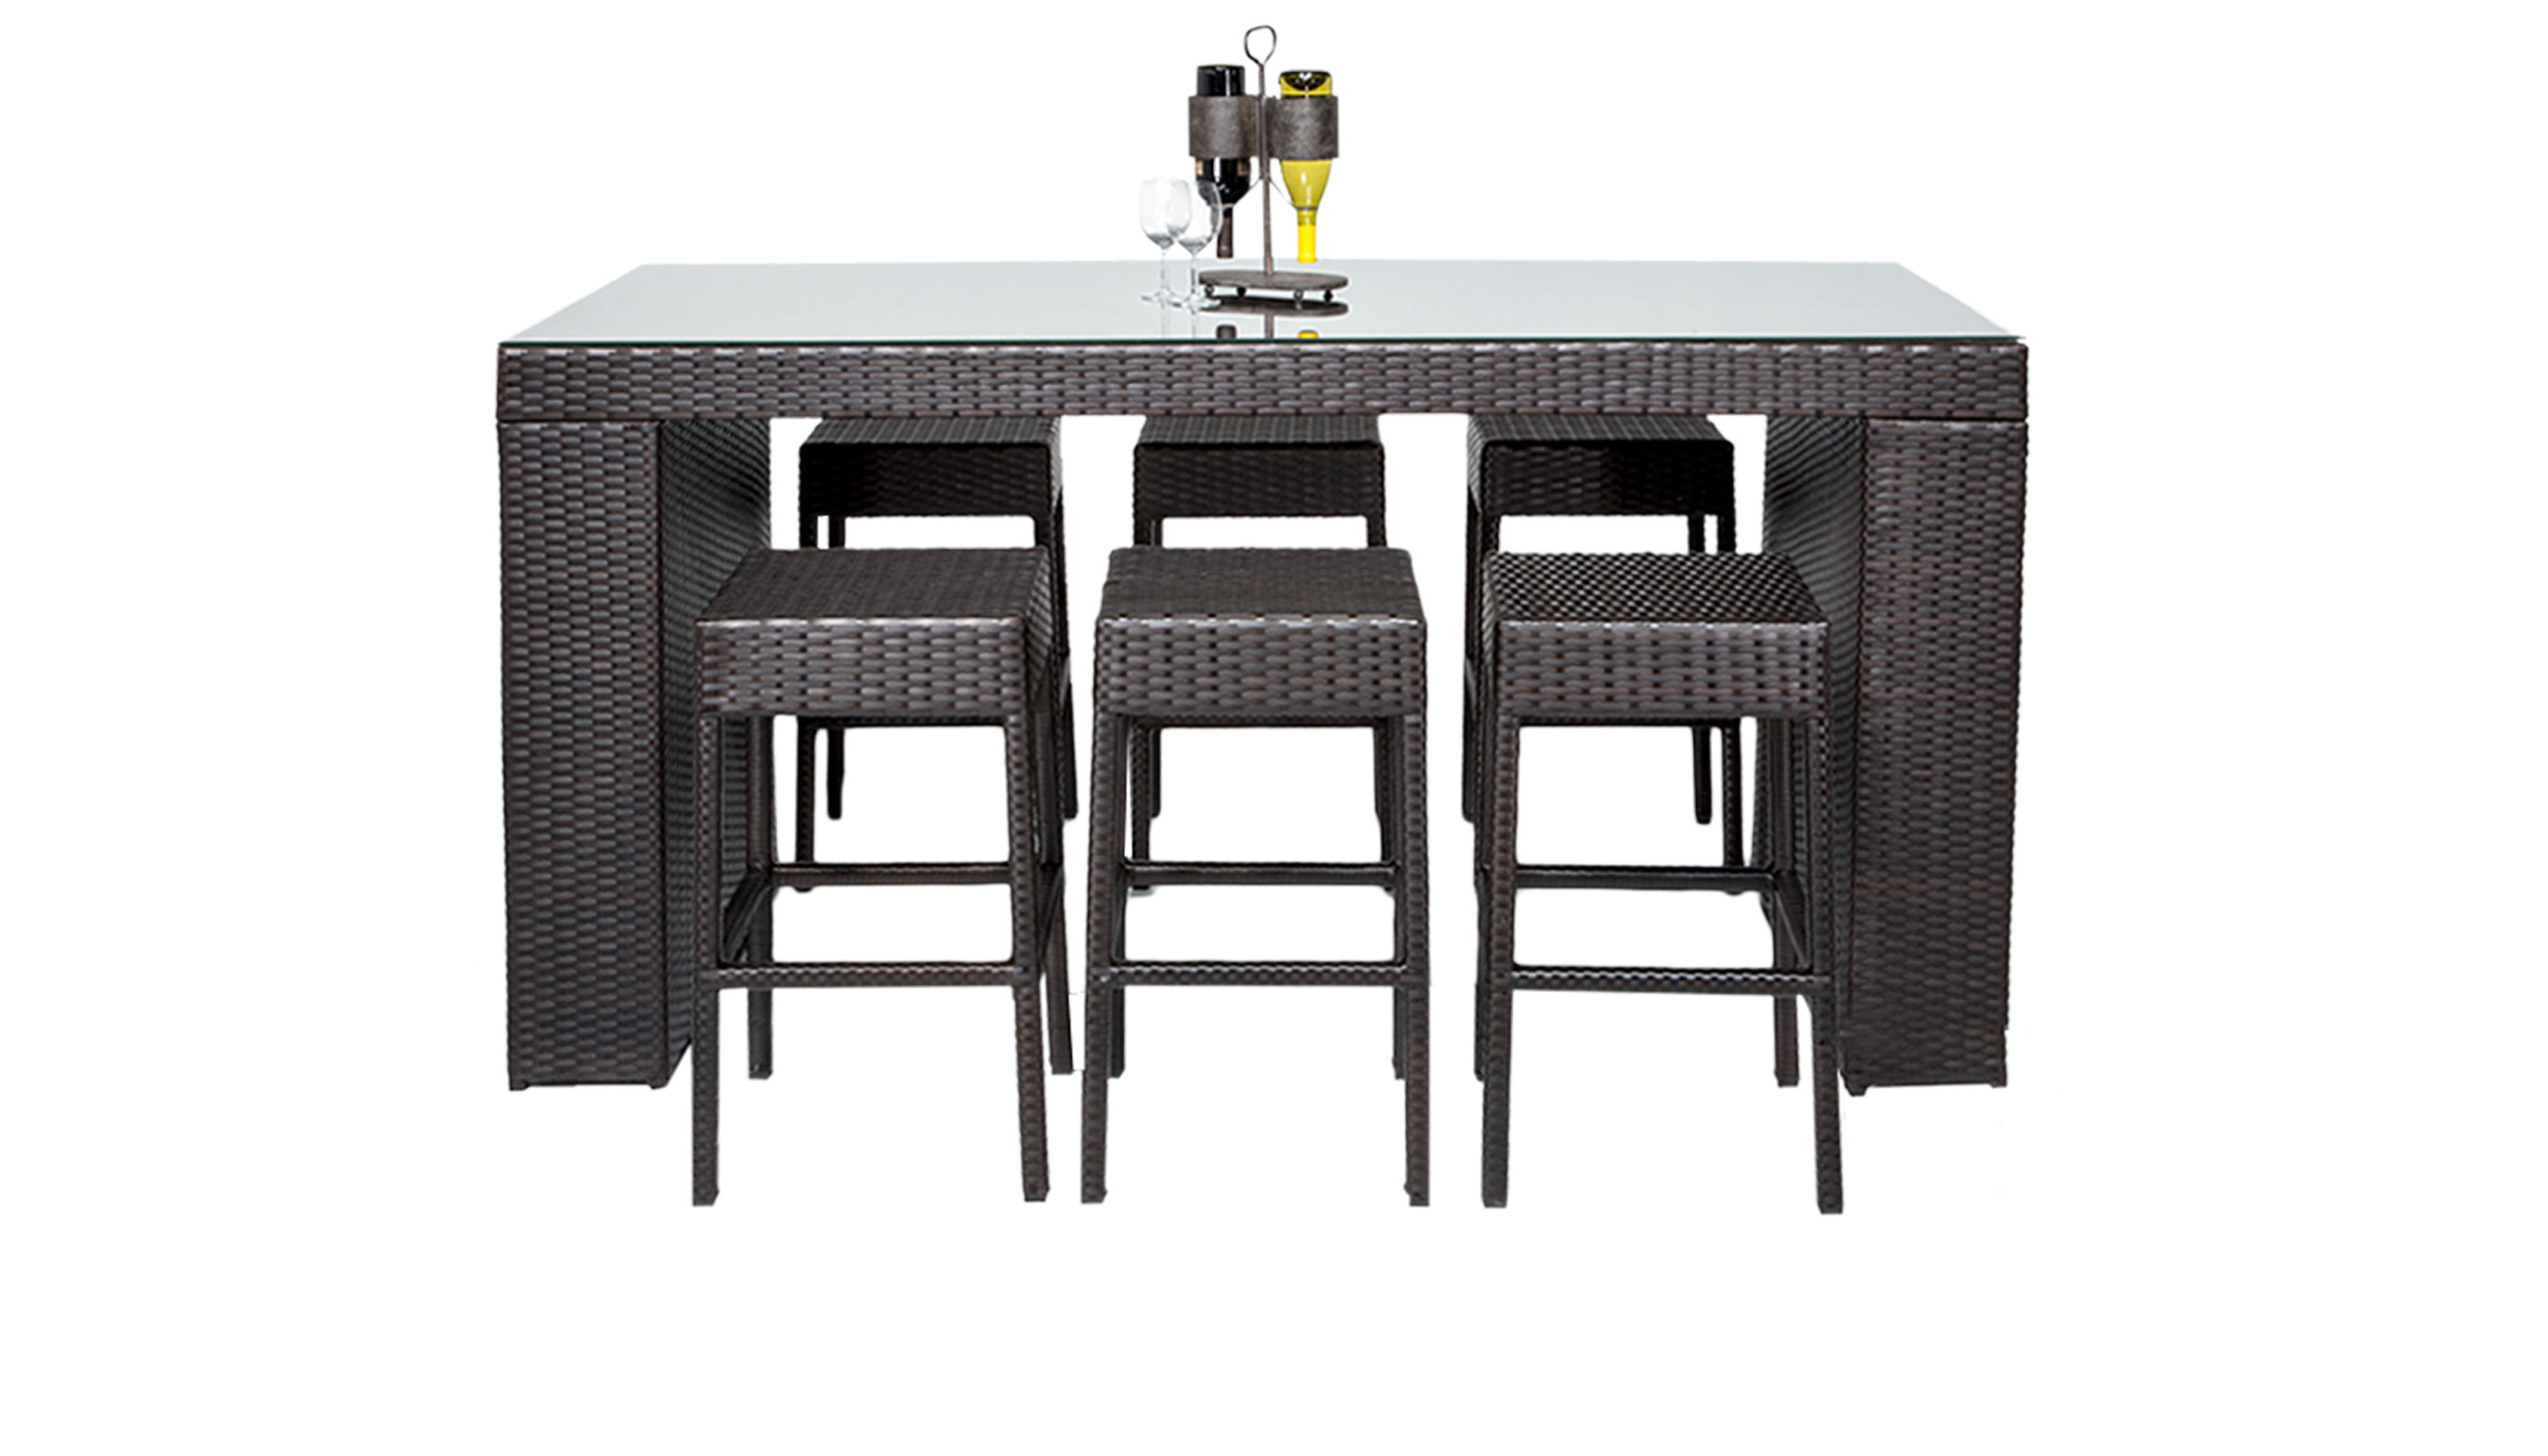 Barbados Bar Table Set With Backless Barstools 7 Piece Outdoor Wicker Patio Furniture - TK Classics